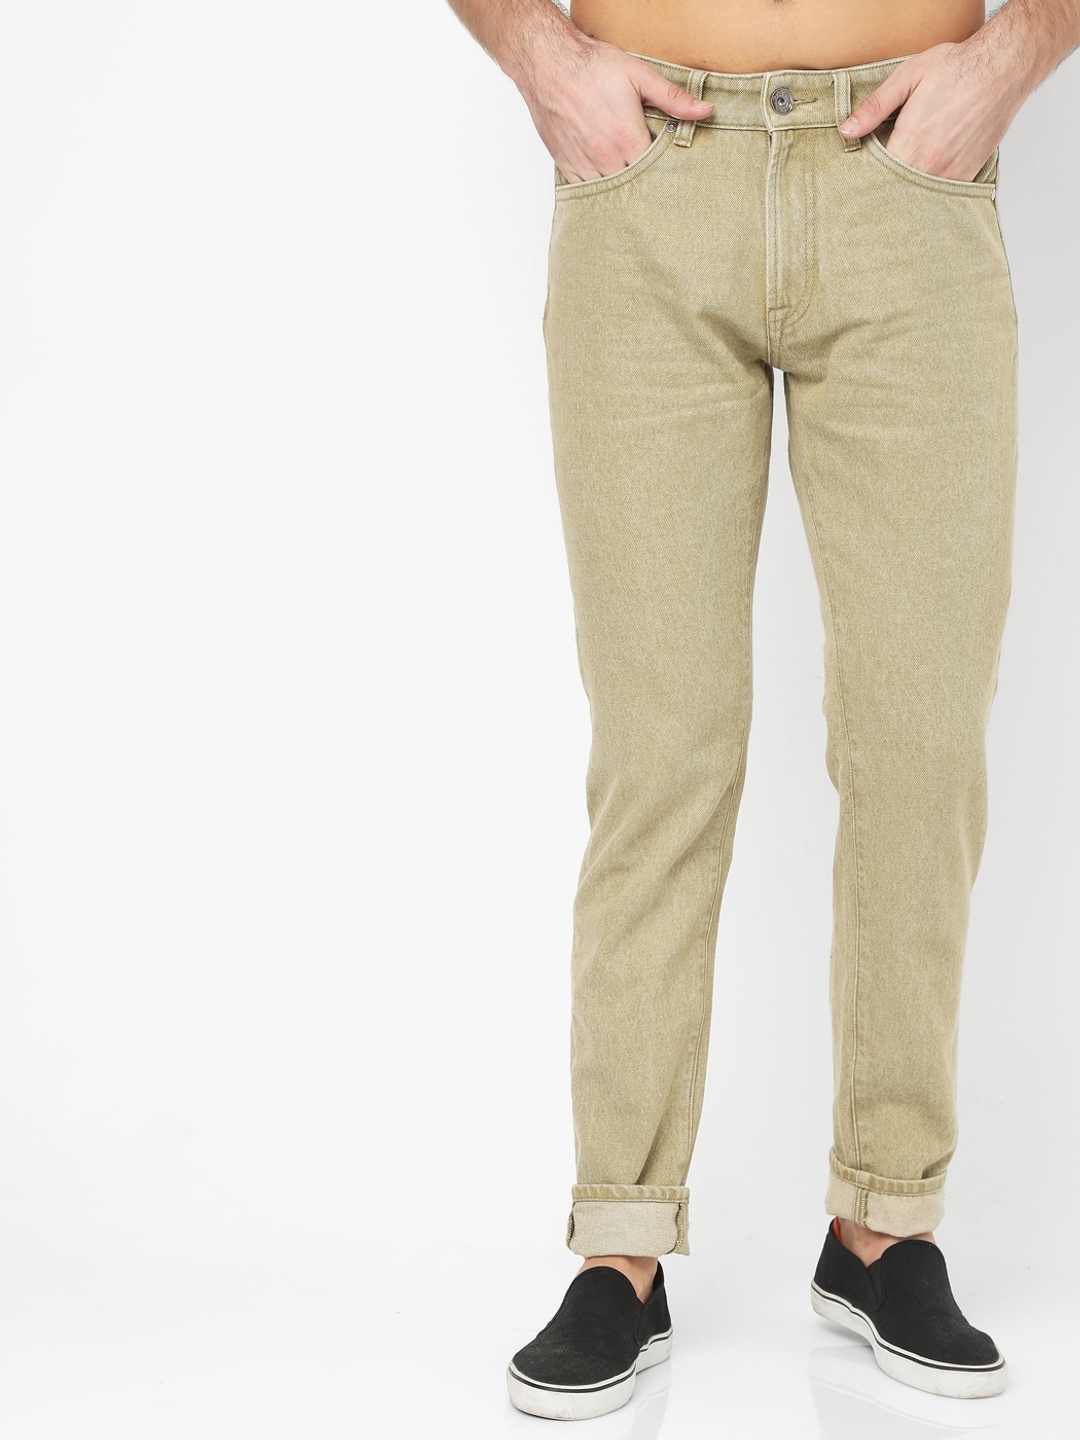 Buy Men Grey Check Carrot Fit Formal Trousers Online  673610  Peter  England